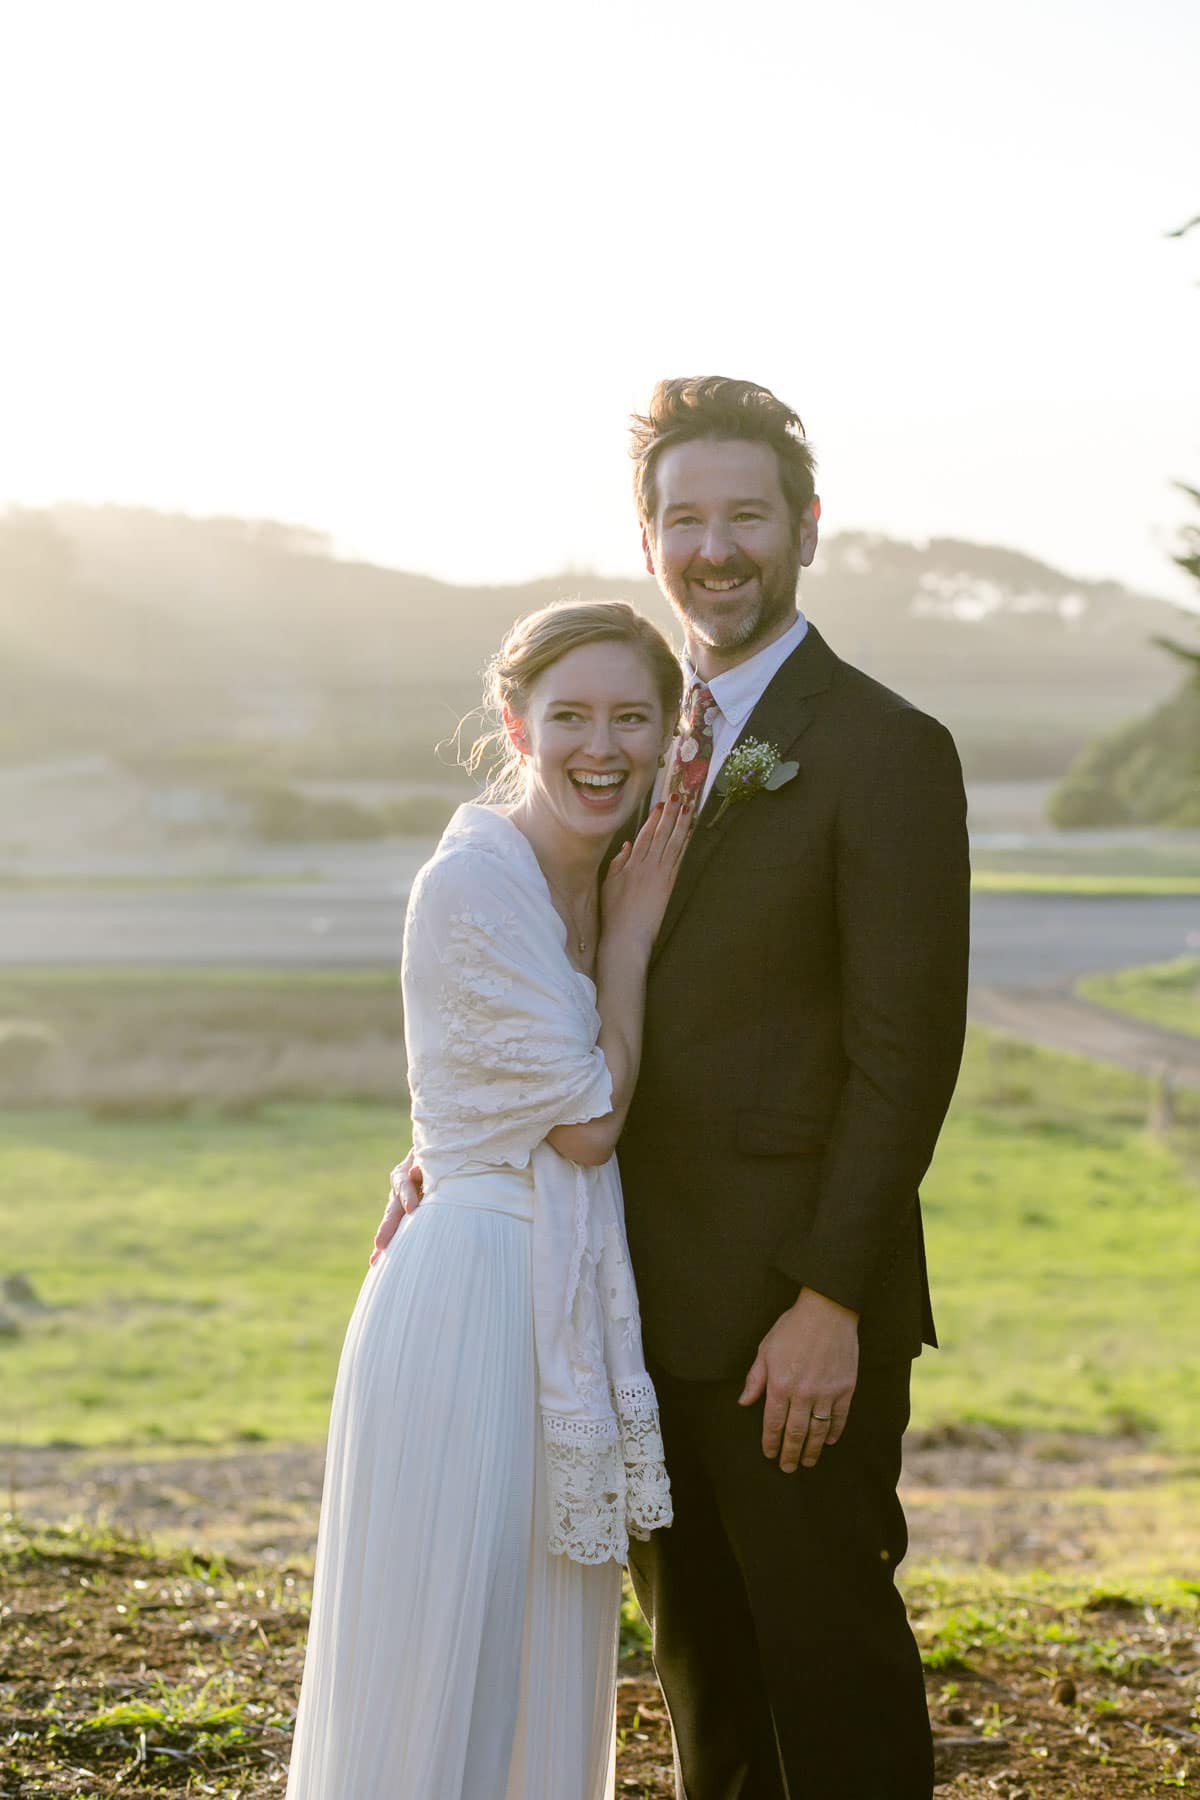 Bride and groom laughing and looking straight ahead outside on a grassy hill during sunset